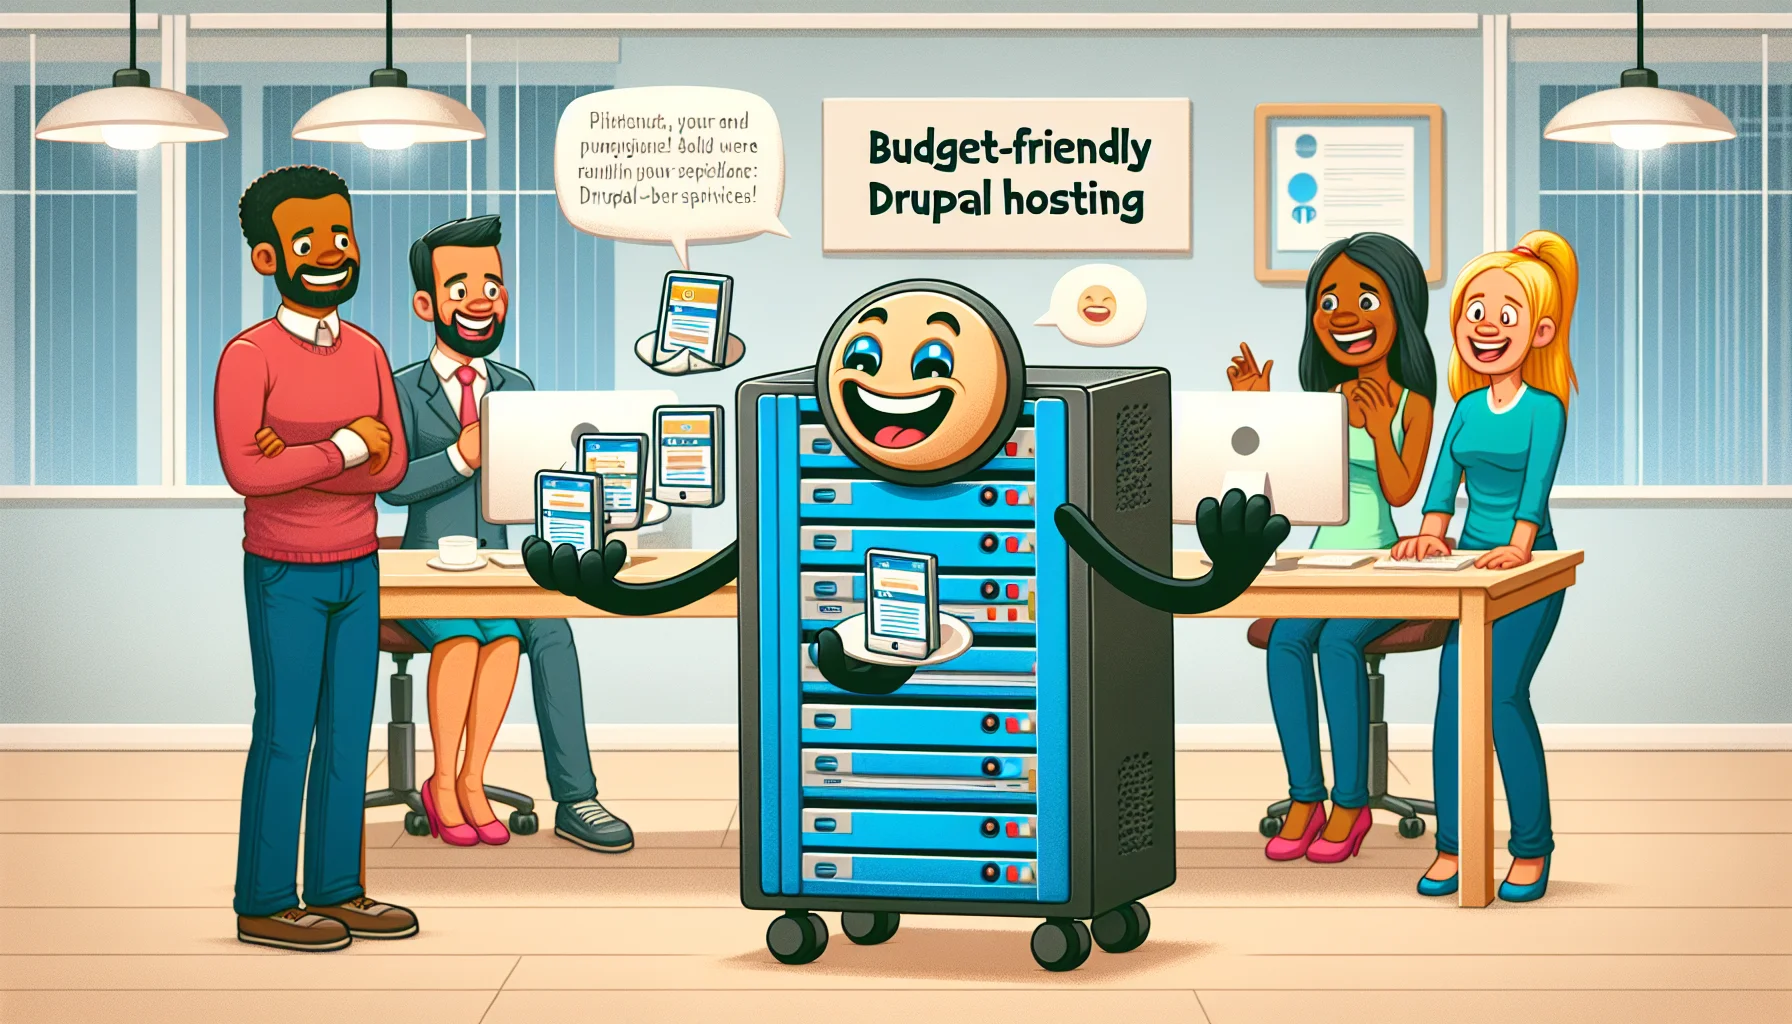 Illustrate a humorous scenario relevant to budget-friendly Drupal hosting. Picture a hardworking yet cheerful anthropomorphic server rack placed in an inviting office environment. The server rack, personified to have arms and legs, frantically juggling website icons to signify various Drupal sites. It succeeds in its task with a bright smile, alluding to the reliable nature of the service. Adjacent to the server rack, a diverse set of amused office workers - Hispanic female, Caucasian male, and a Black non-binary individual - watch this amusing spectacle, suggesting an enticing web hosting scenario. The words 'Budget-Friendly Drupal Hosting' are prominently displayed in an appealing, bold font.